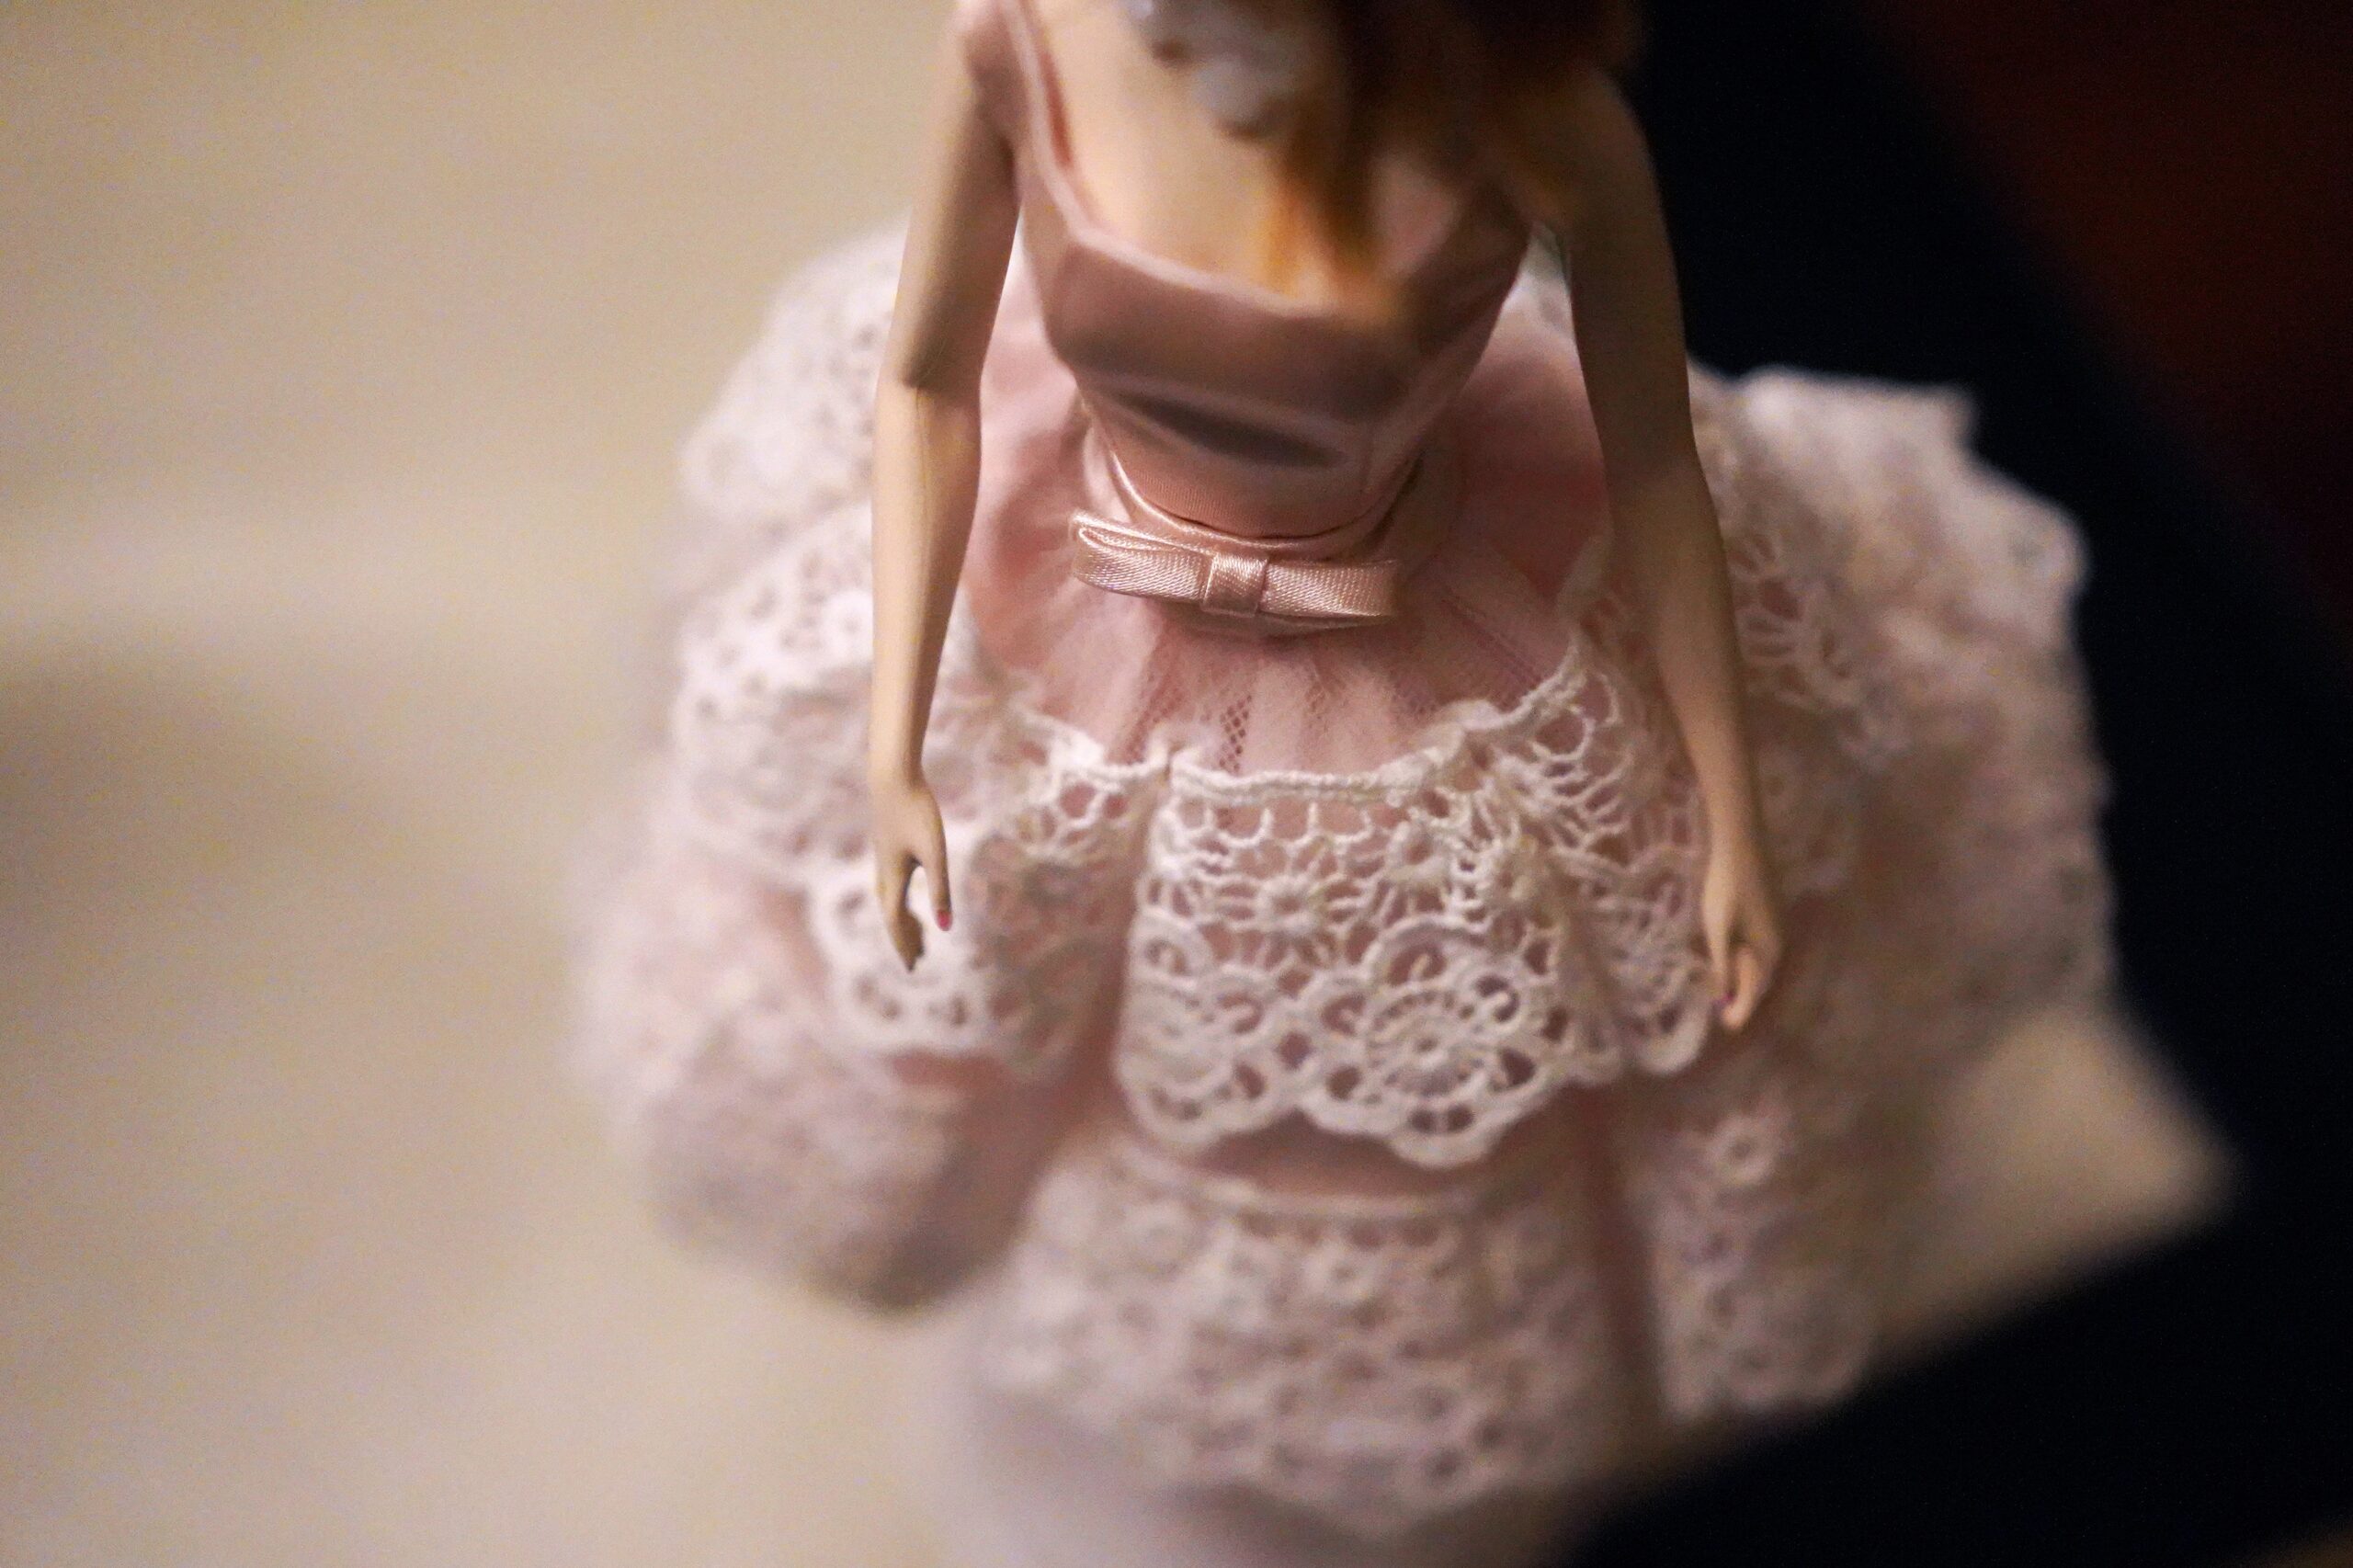 A fashion doll wearing a pink tutu-style dress, replicating the femininity and style of Barbie.